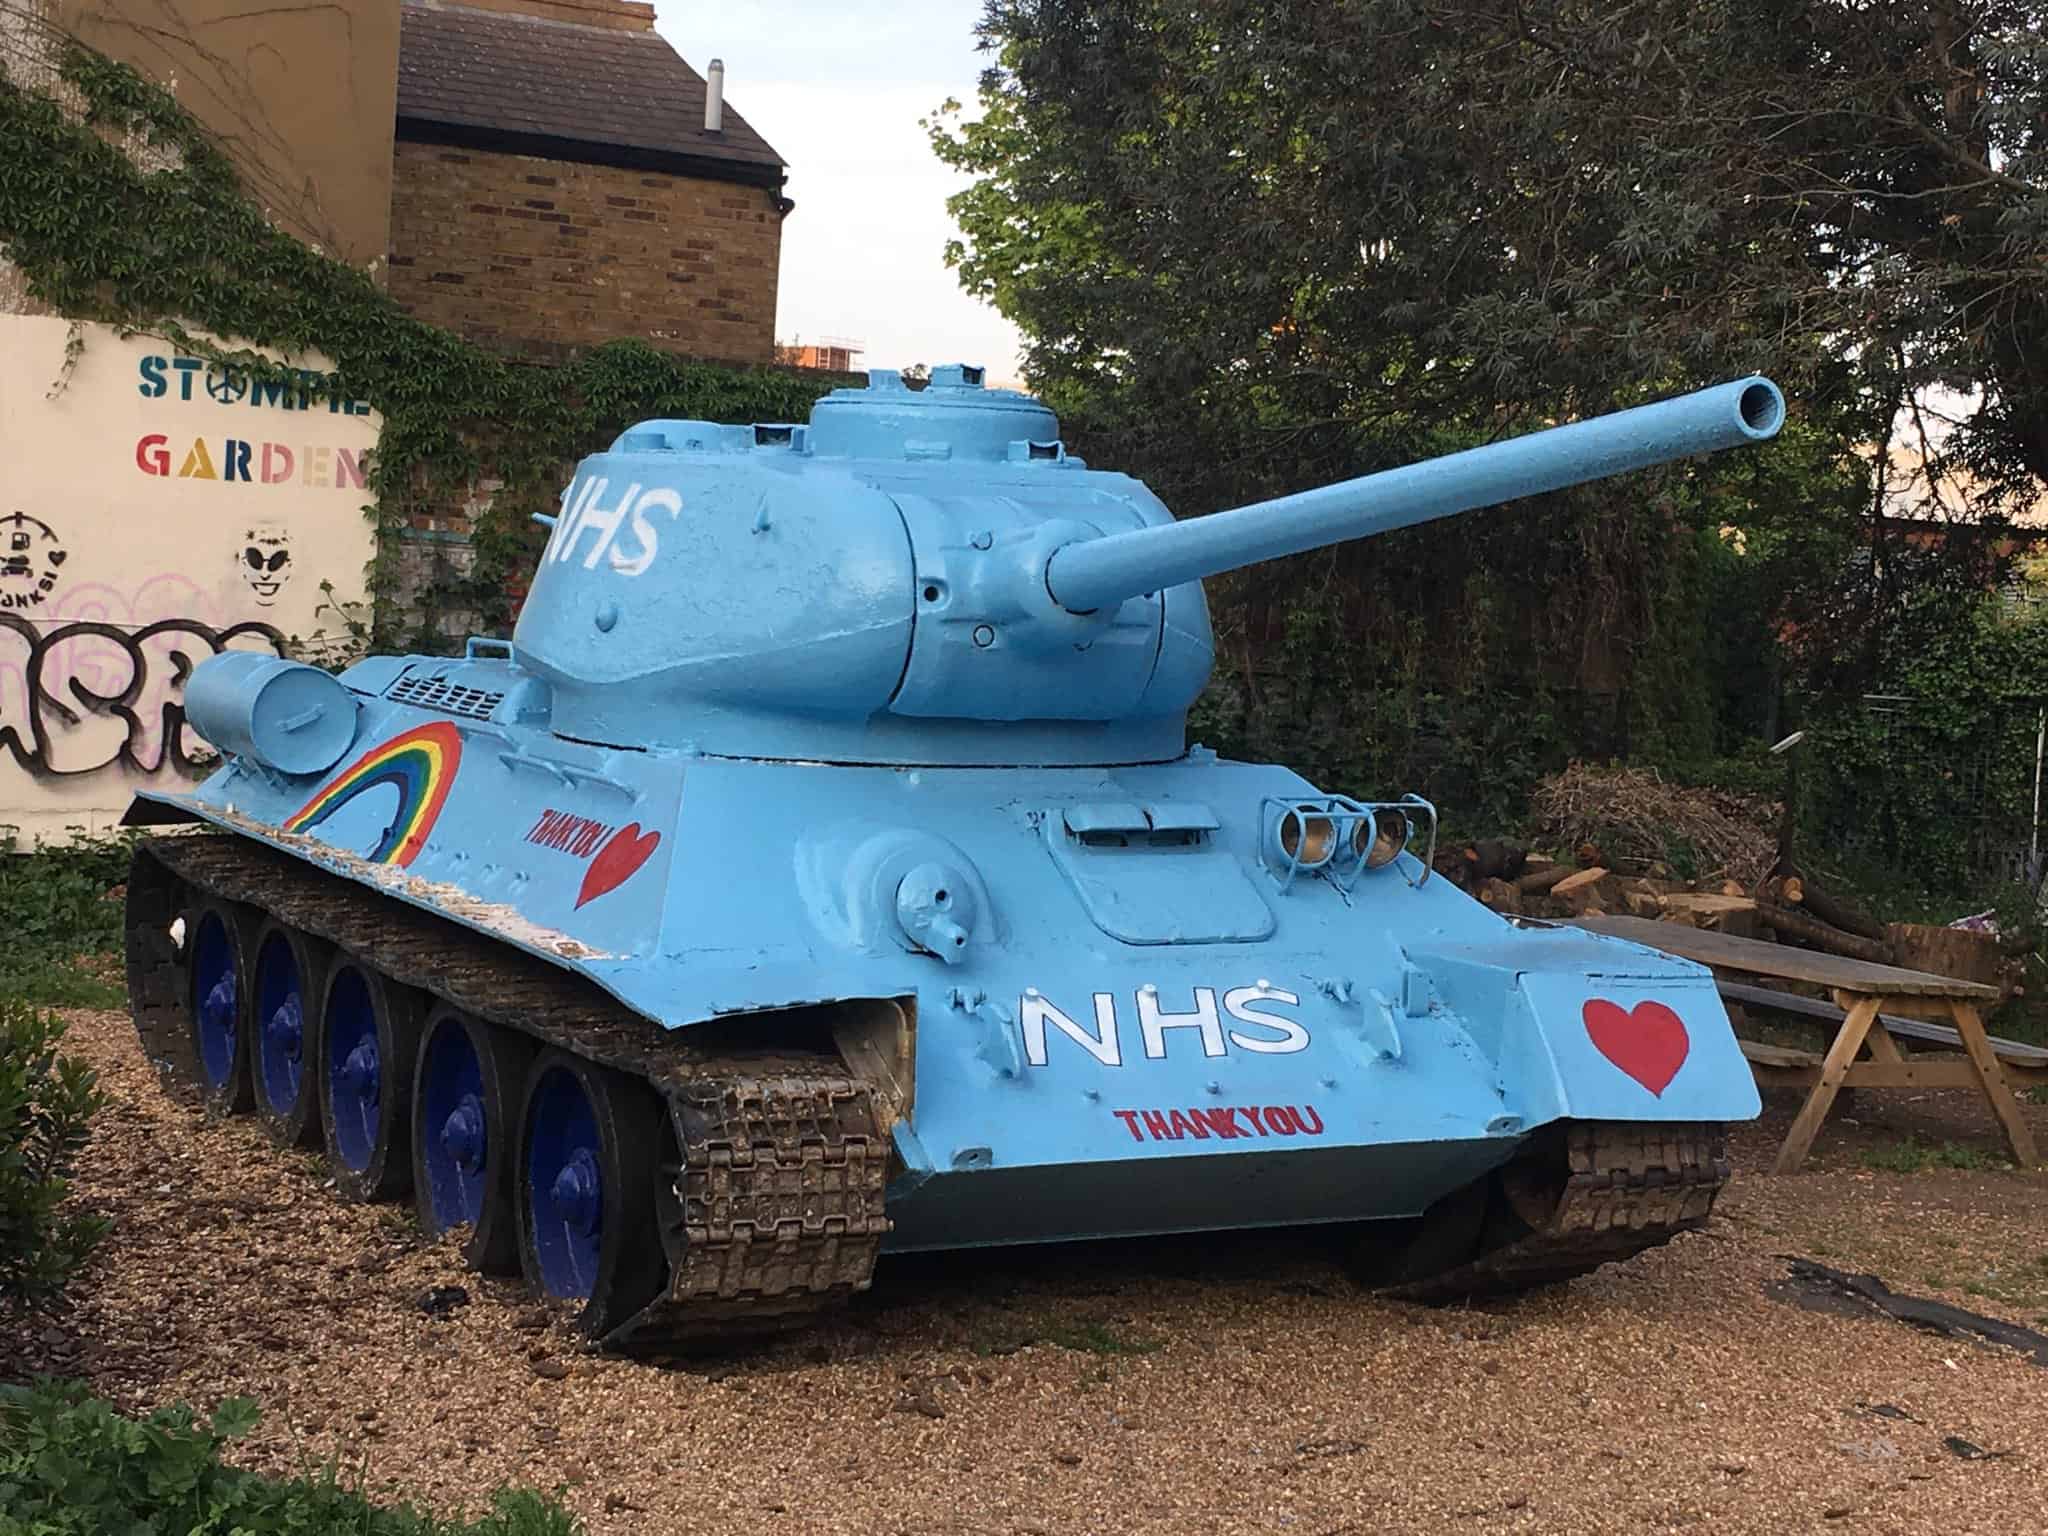 Tanks to the NHS! Iconic Bermondsey tank given makeover to thank